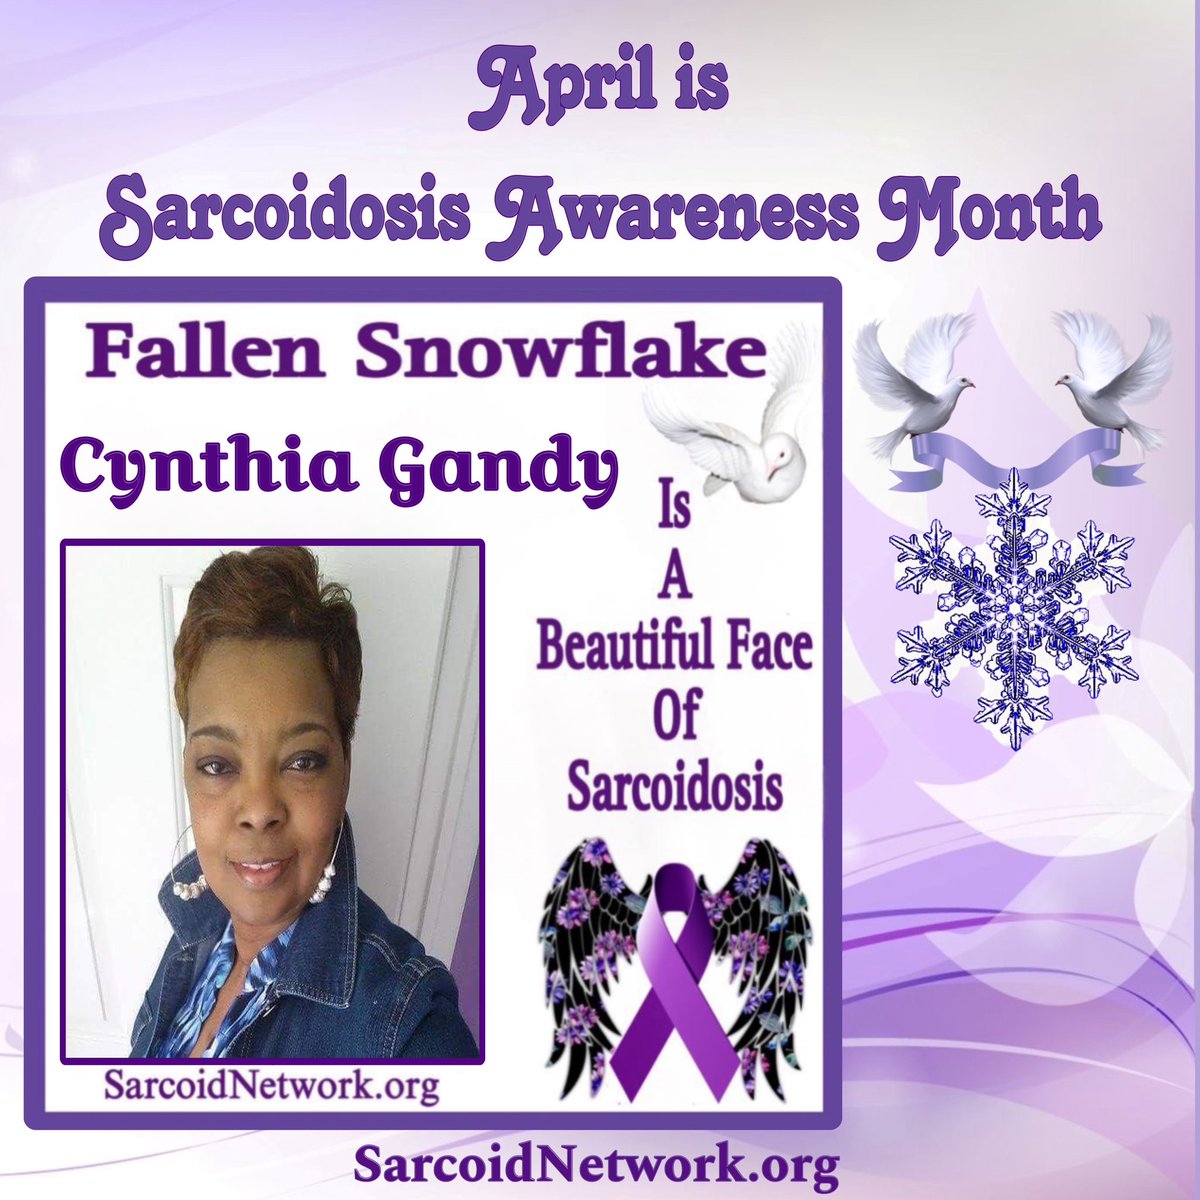 This is our Sarcoidosis Sister Fallen Snowflake Cynthia Gandy and she is a Beautiful Face of Sarcoidosis.💜

#Sarcoidosis #raredisease #preciousmemories #patientadvocate #worldsarcoidosisday #beautifulfacesofsarcoidosis #sarcoidosisawarenessmonth